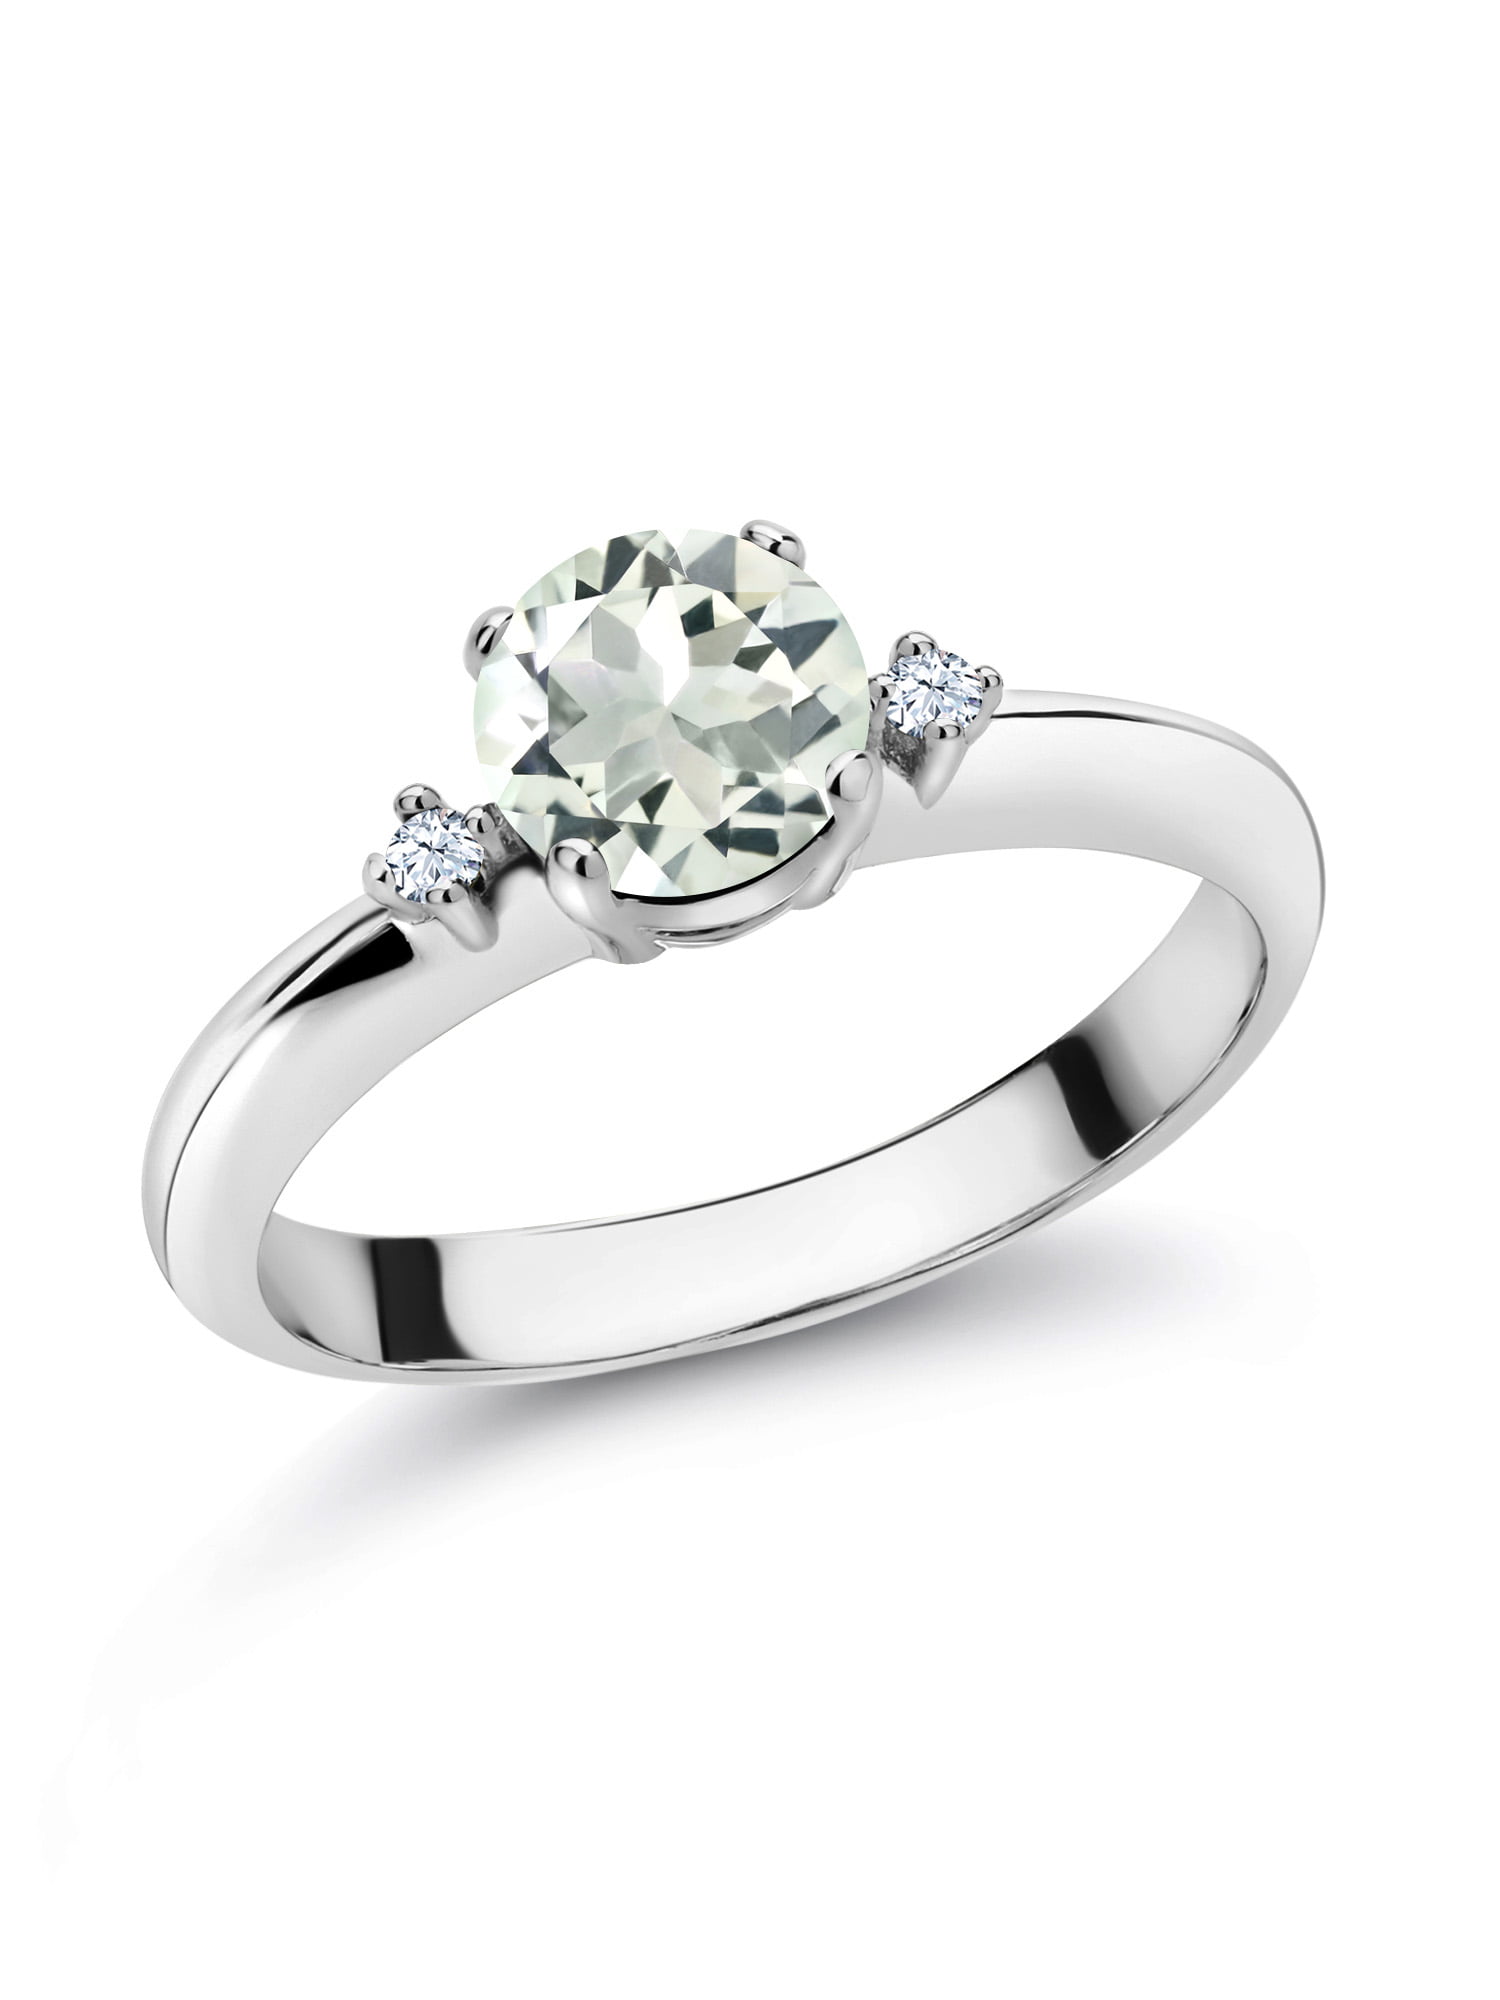 4.10Ct White Marquise Shaped Women's Engagement Ring With 925 Sterling Silver 